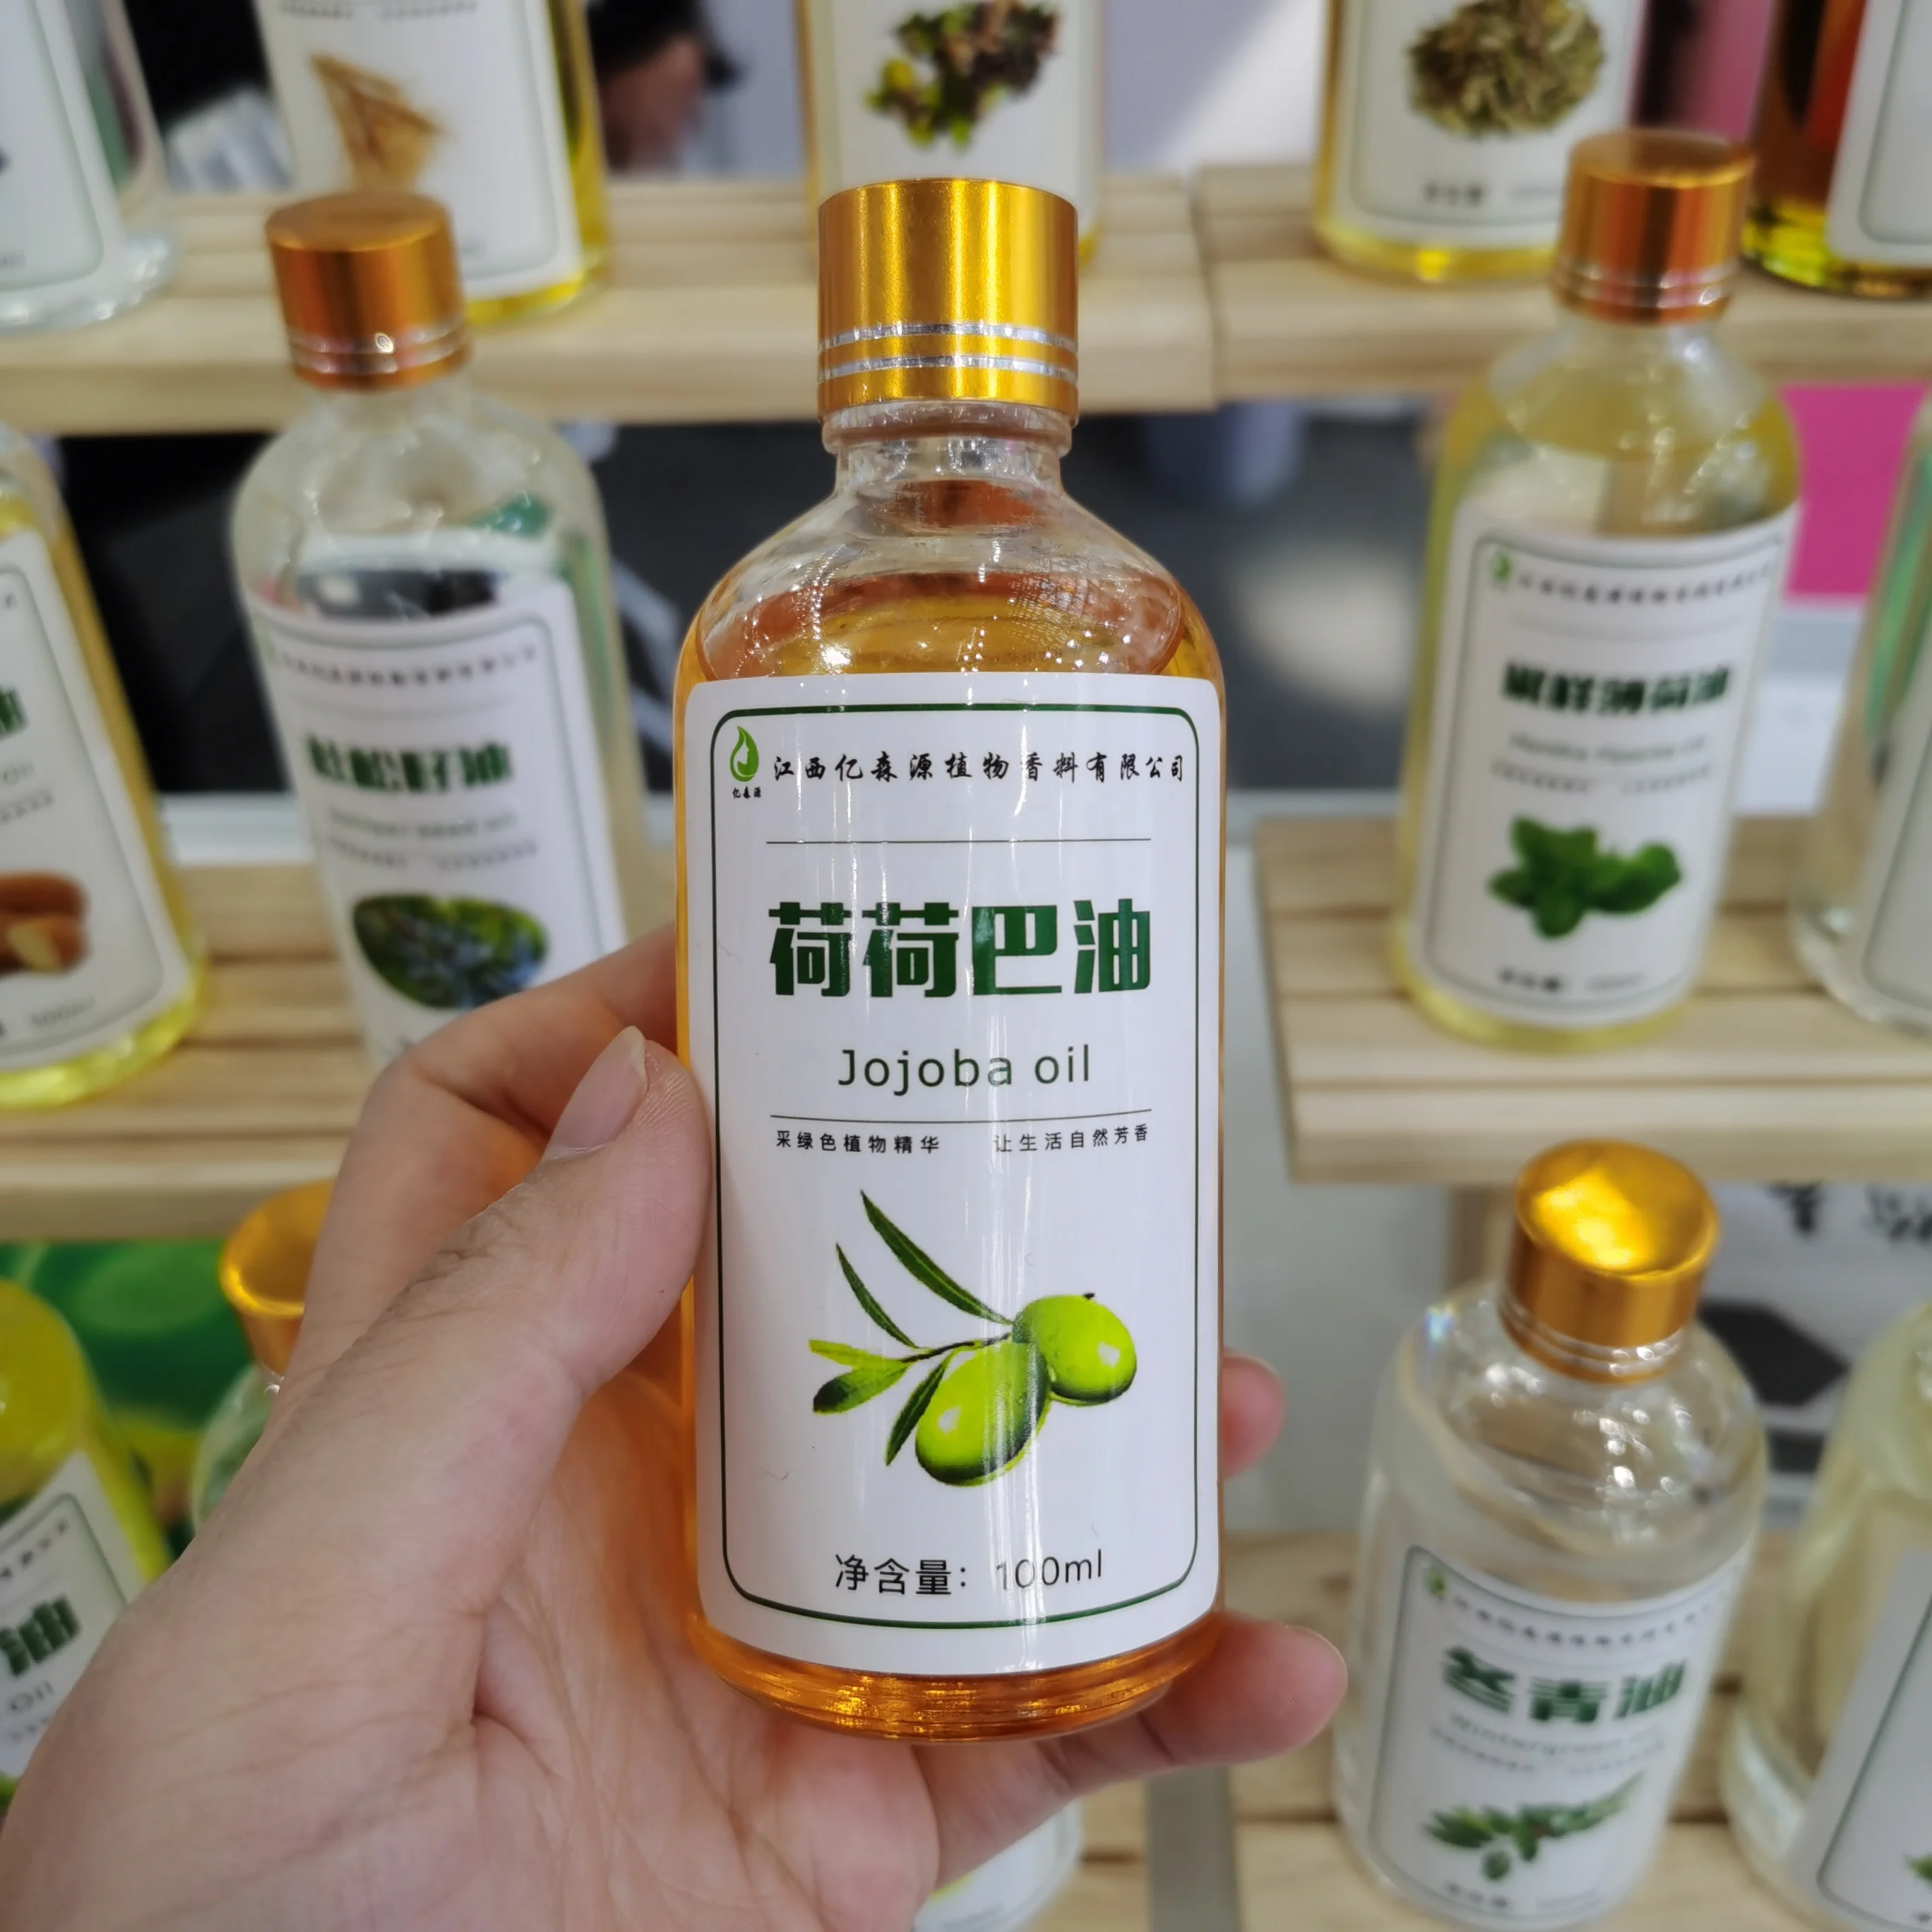 

100% Pure Natural Cold Pressed Unrefined Price Jojoba Oil Jojoba Seed Oil Bulk Wholesale With Private Label, Colorless or golden yellow liquid